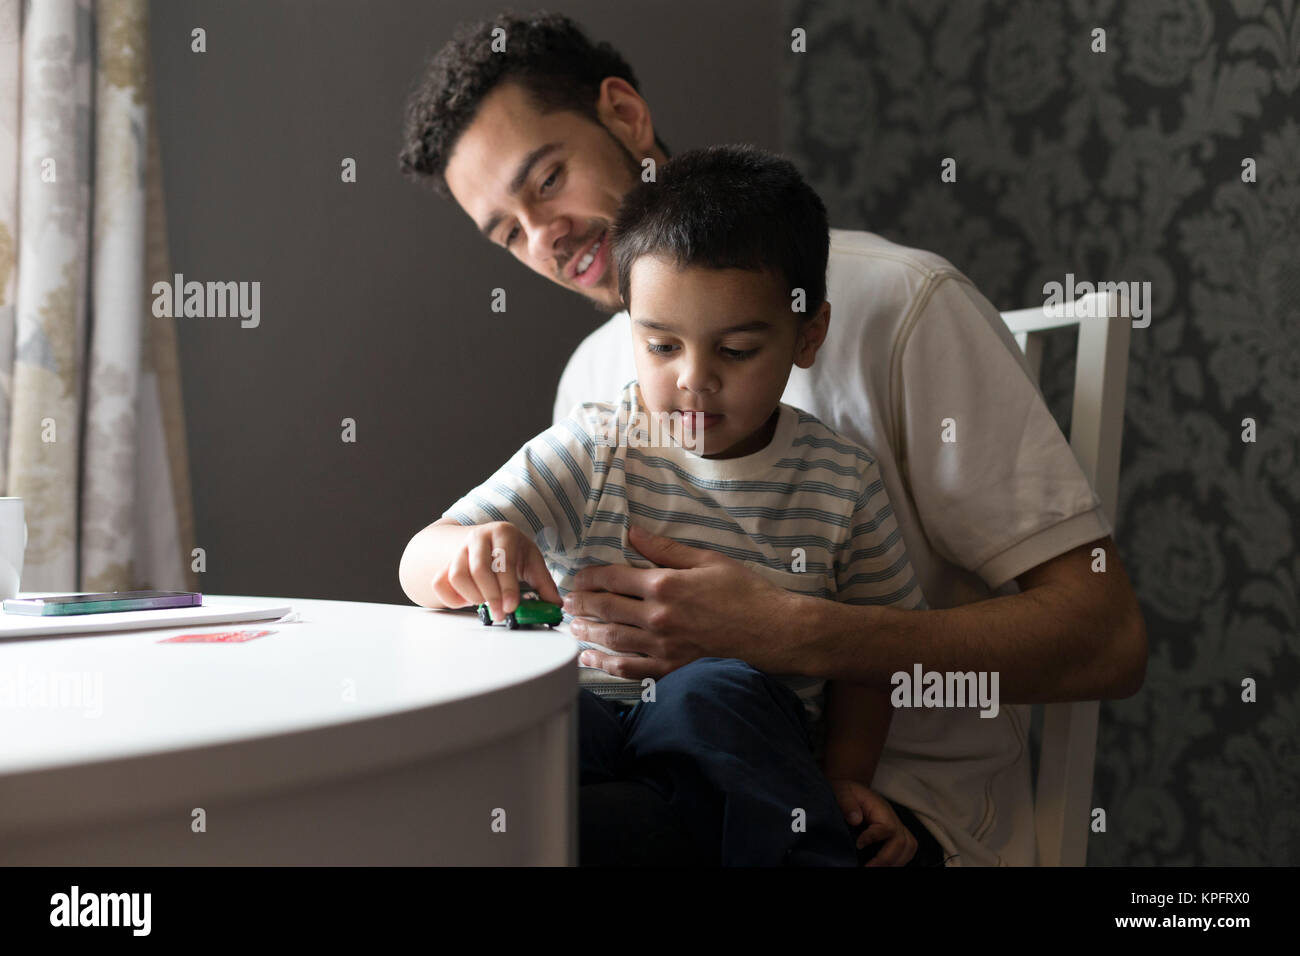 Father and son bonding Stock Photo